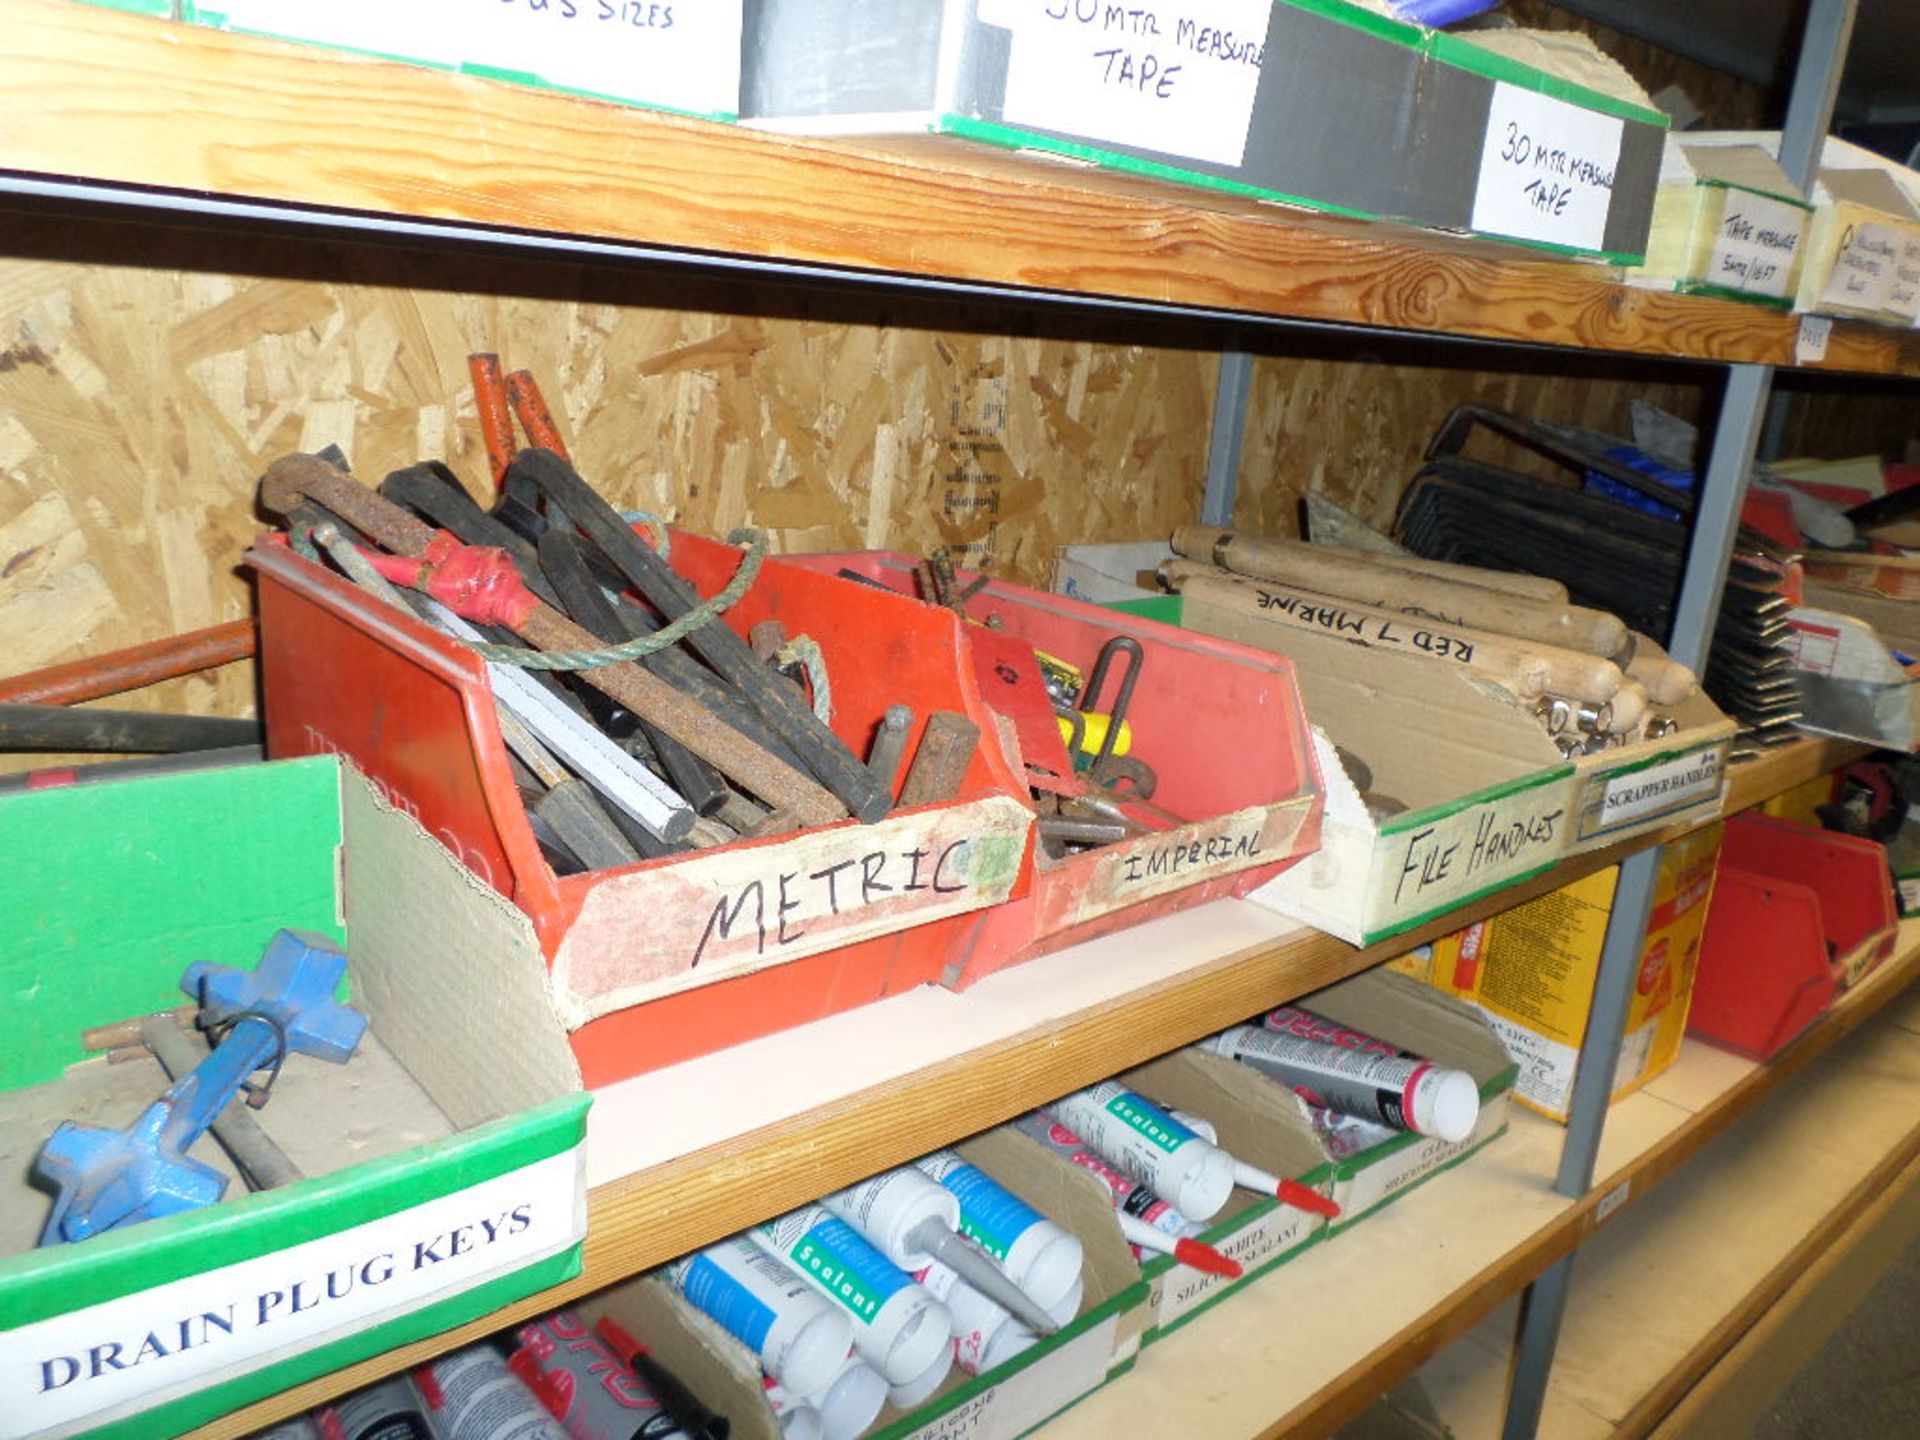 Contents to Rack D, tier DR4 mainly Pliers, Hole cutters, hole punches, hex keys, hammers, sockets - Image 2 of 4